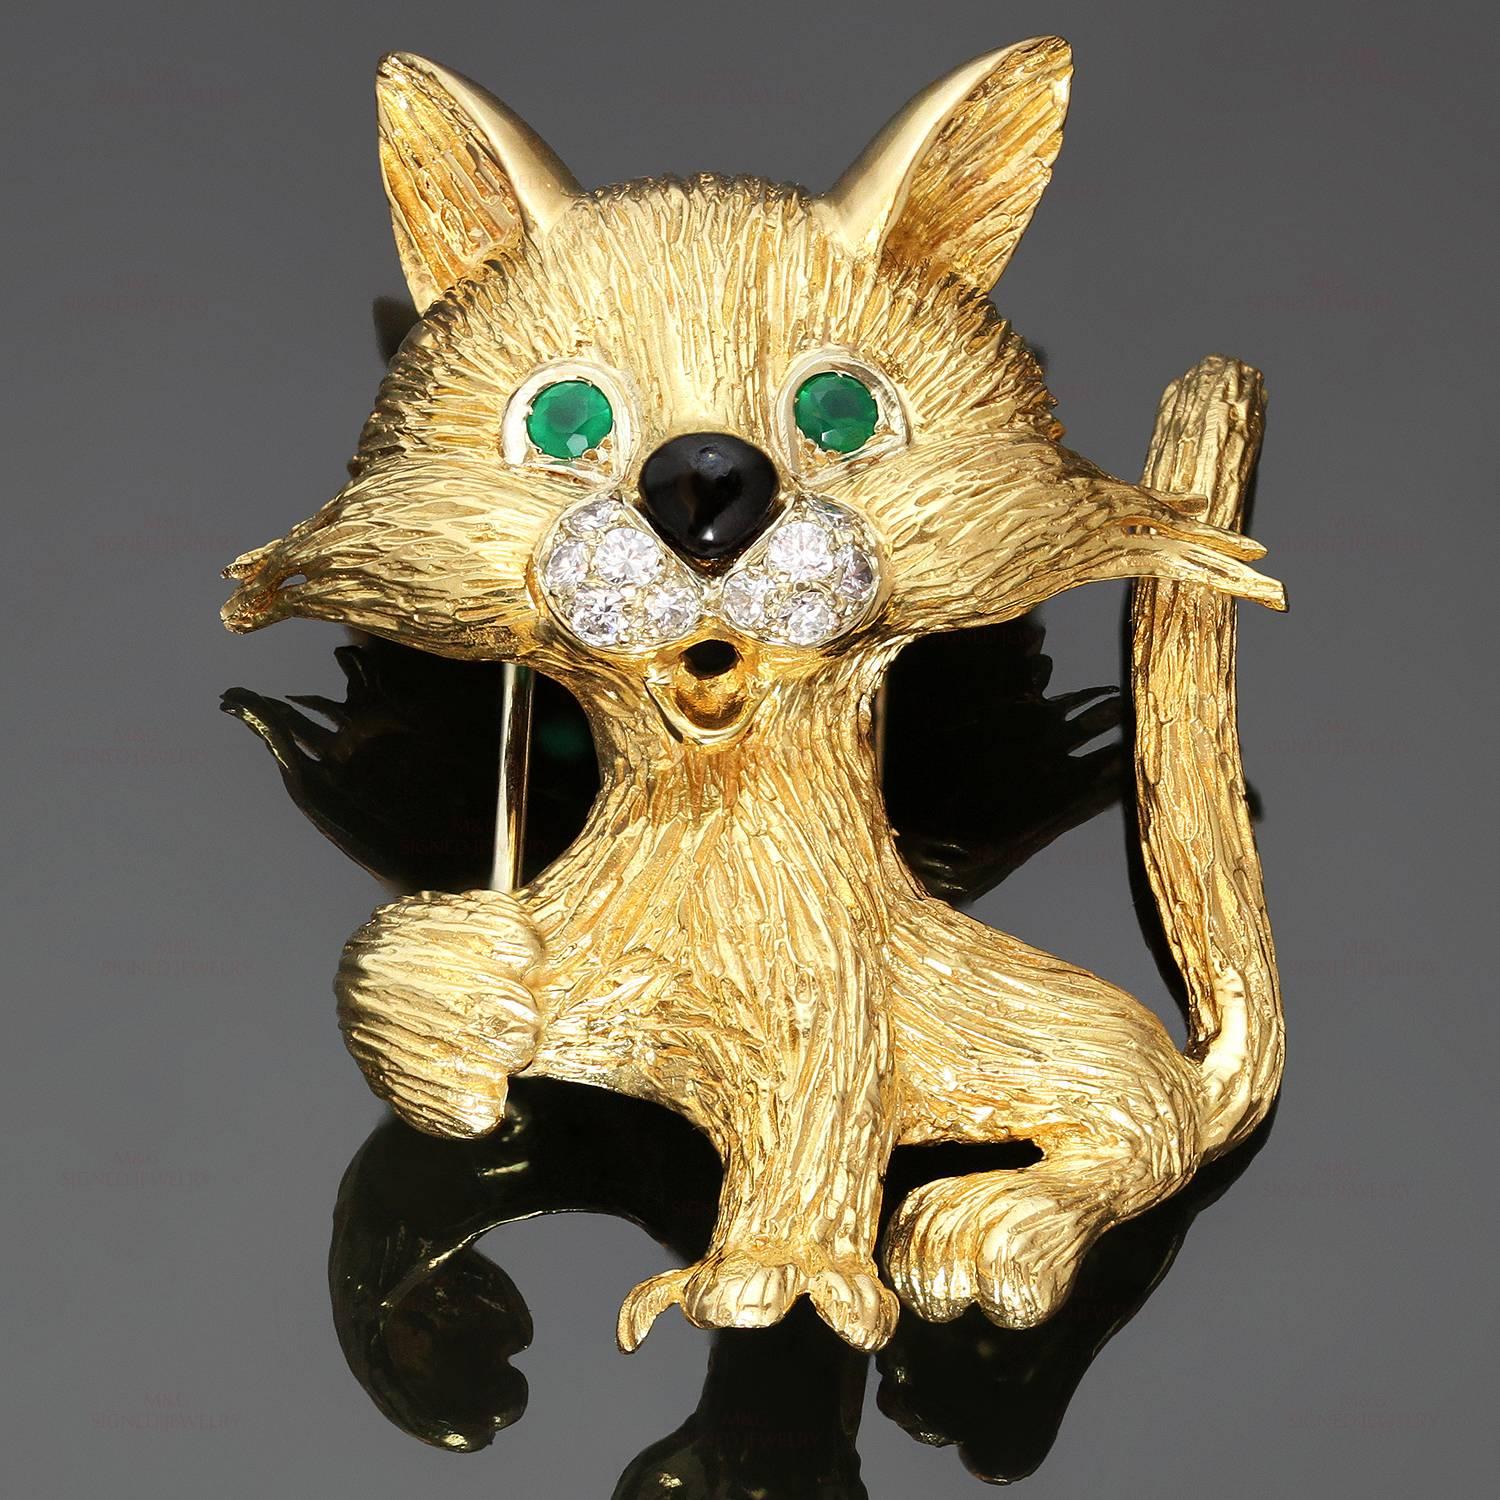 This rare Van Cleef & Arpels brooch features a mid-century design of a whimsical cat crafted in 18k yellow gold and accented with 10 round brilliant-cut diamonds of an estimated 0.27 carats, 2 round-cut emerald eyes of an estimated 0.10 carats, and